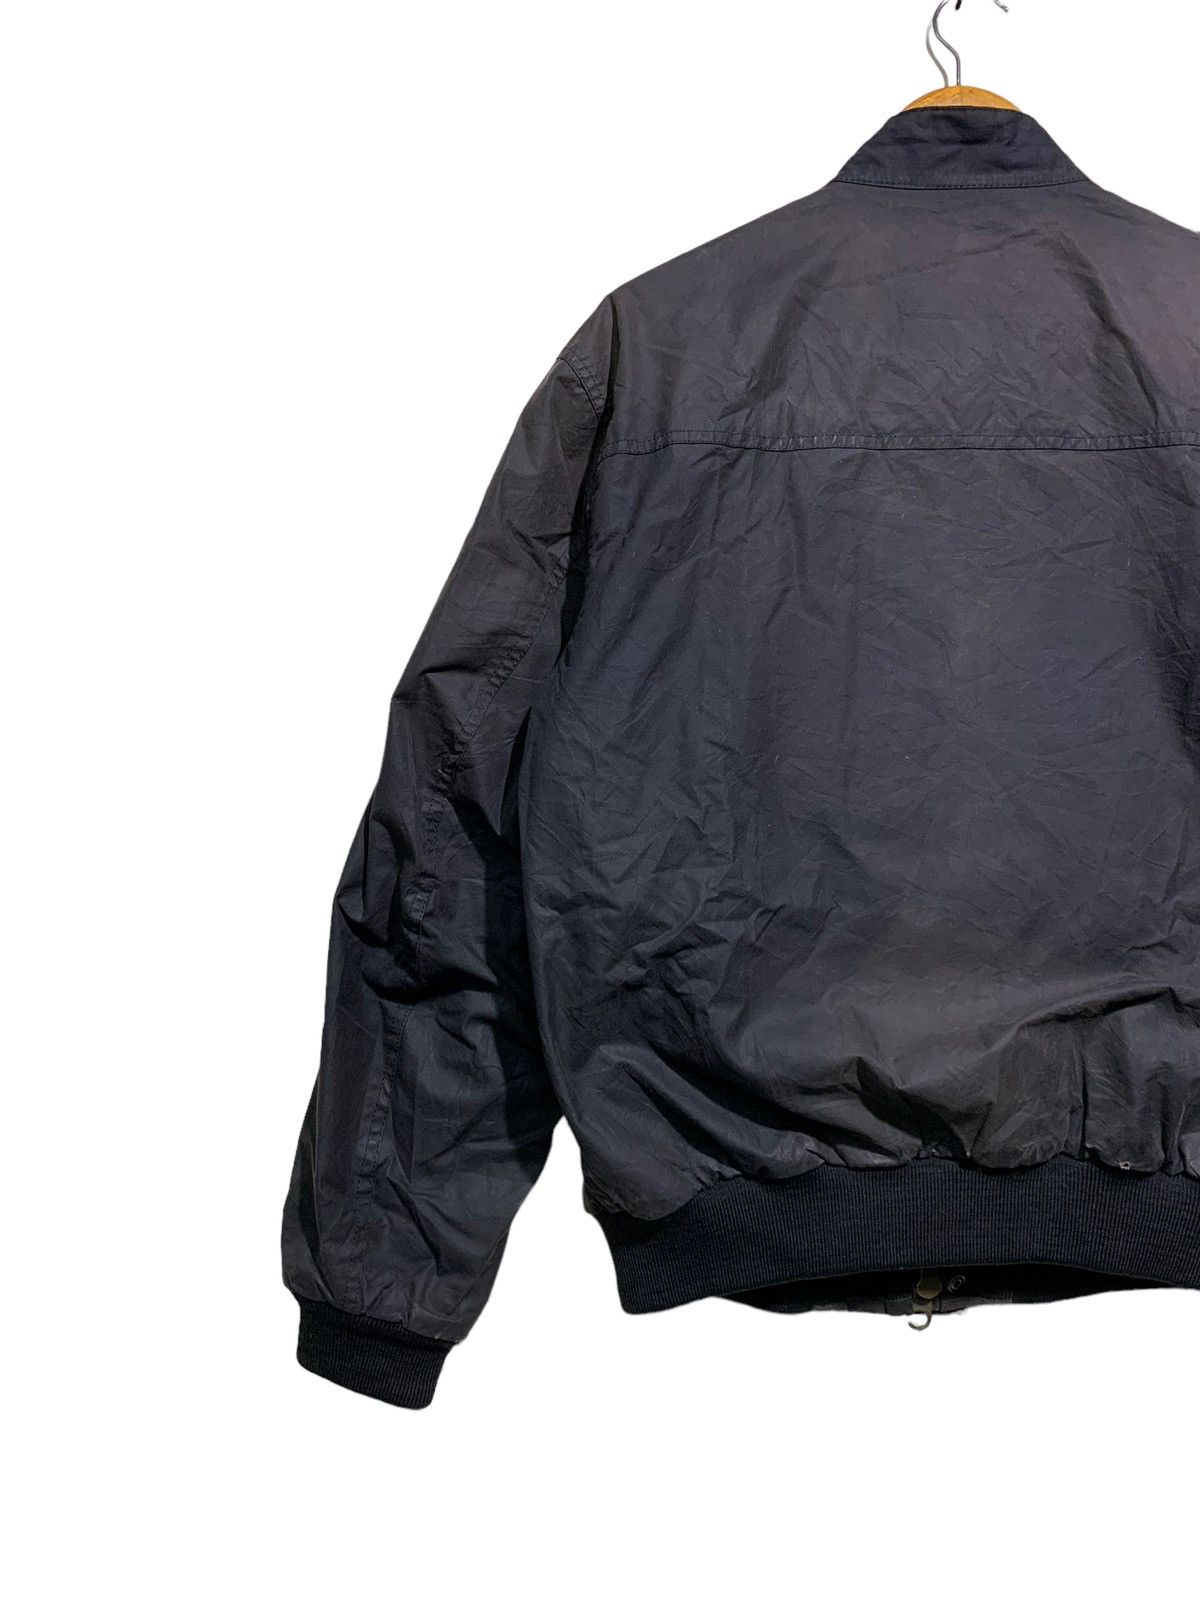 🔥BARBOUR INTERNATIONAL WAXED BOMBER JACKETS - 6